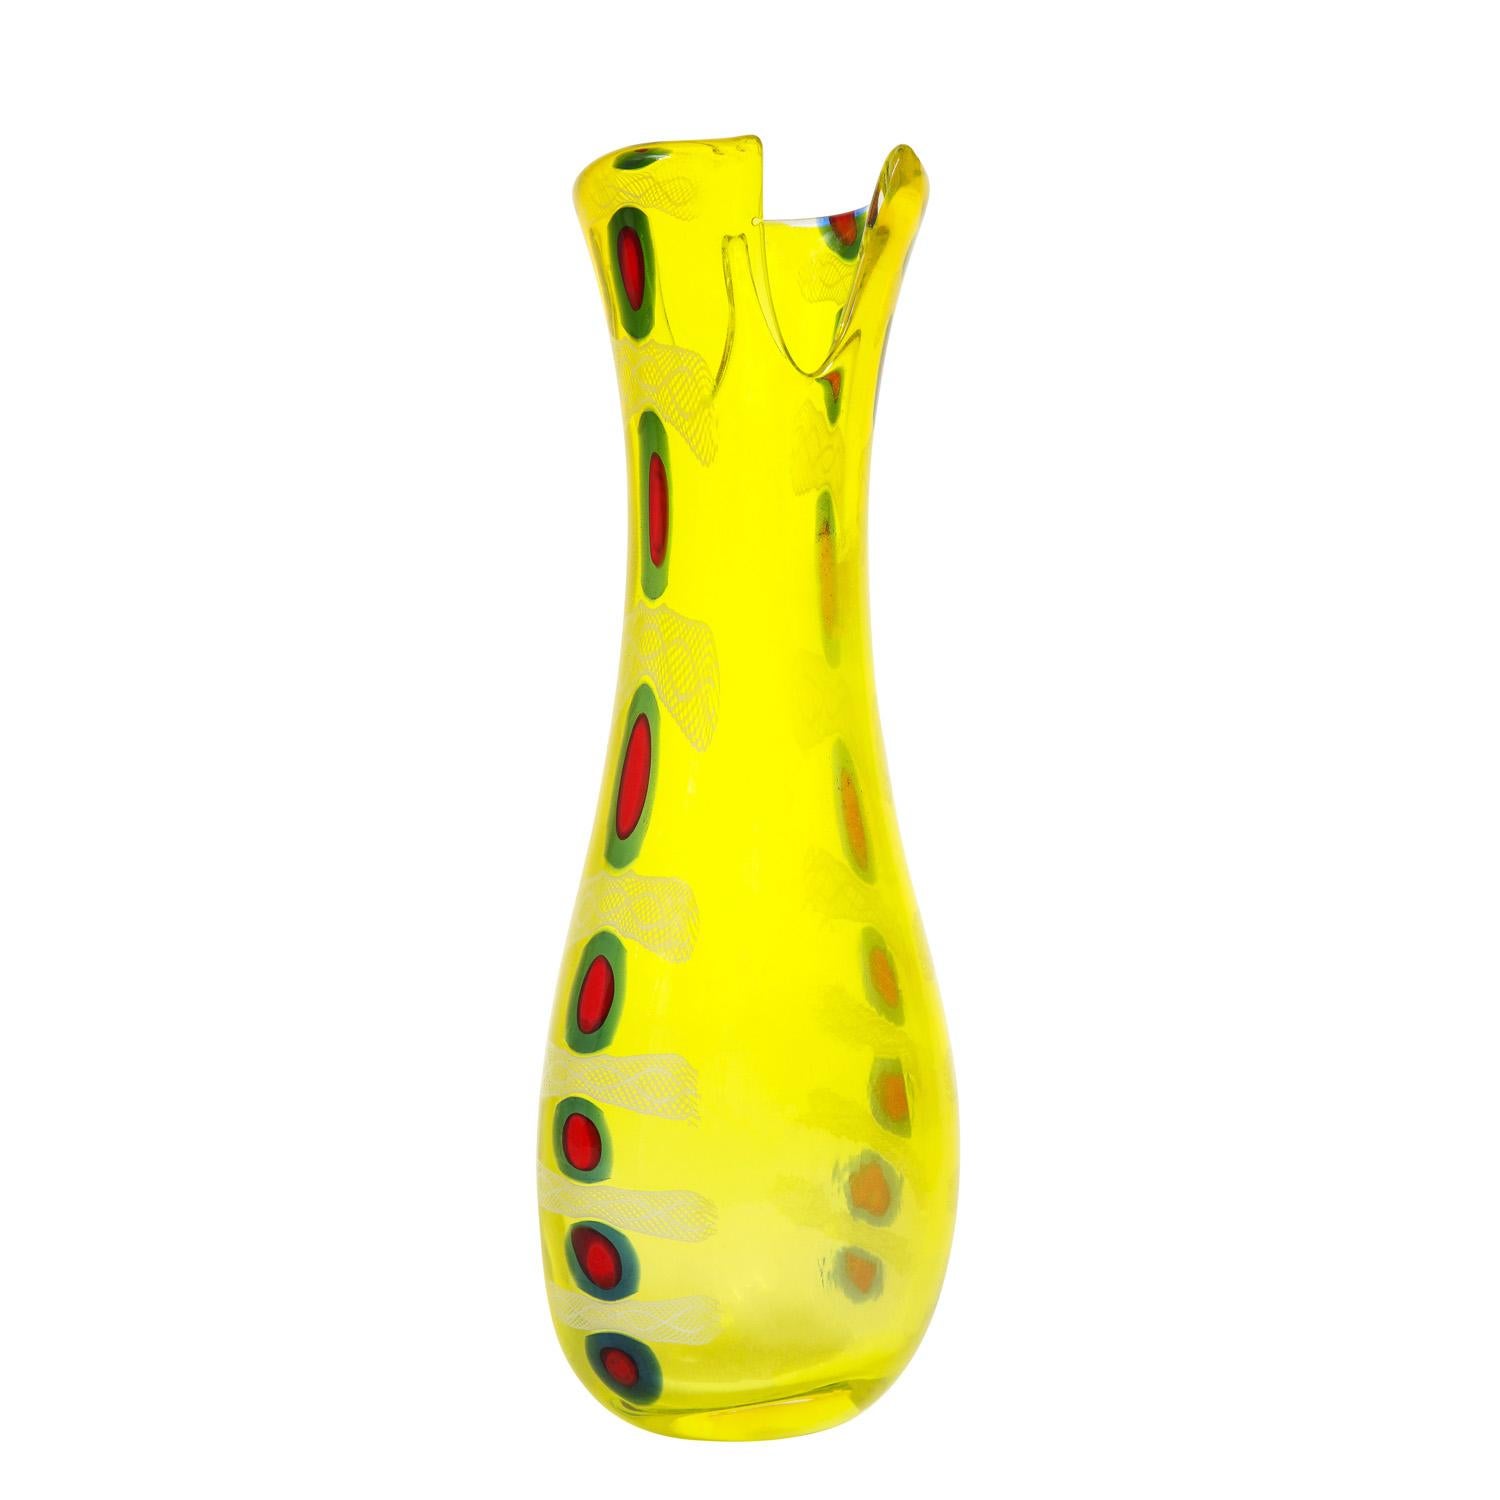 Hand-blown vase from the Murrine Incatenate series, yellow glass with red and blue murrhines, by Anzolo Fuga for AVEM, Murano Italy, ca 1959. These Murrine Incatanate pieces are bold and graphic and unique works of art by one of the most important